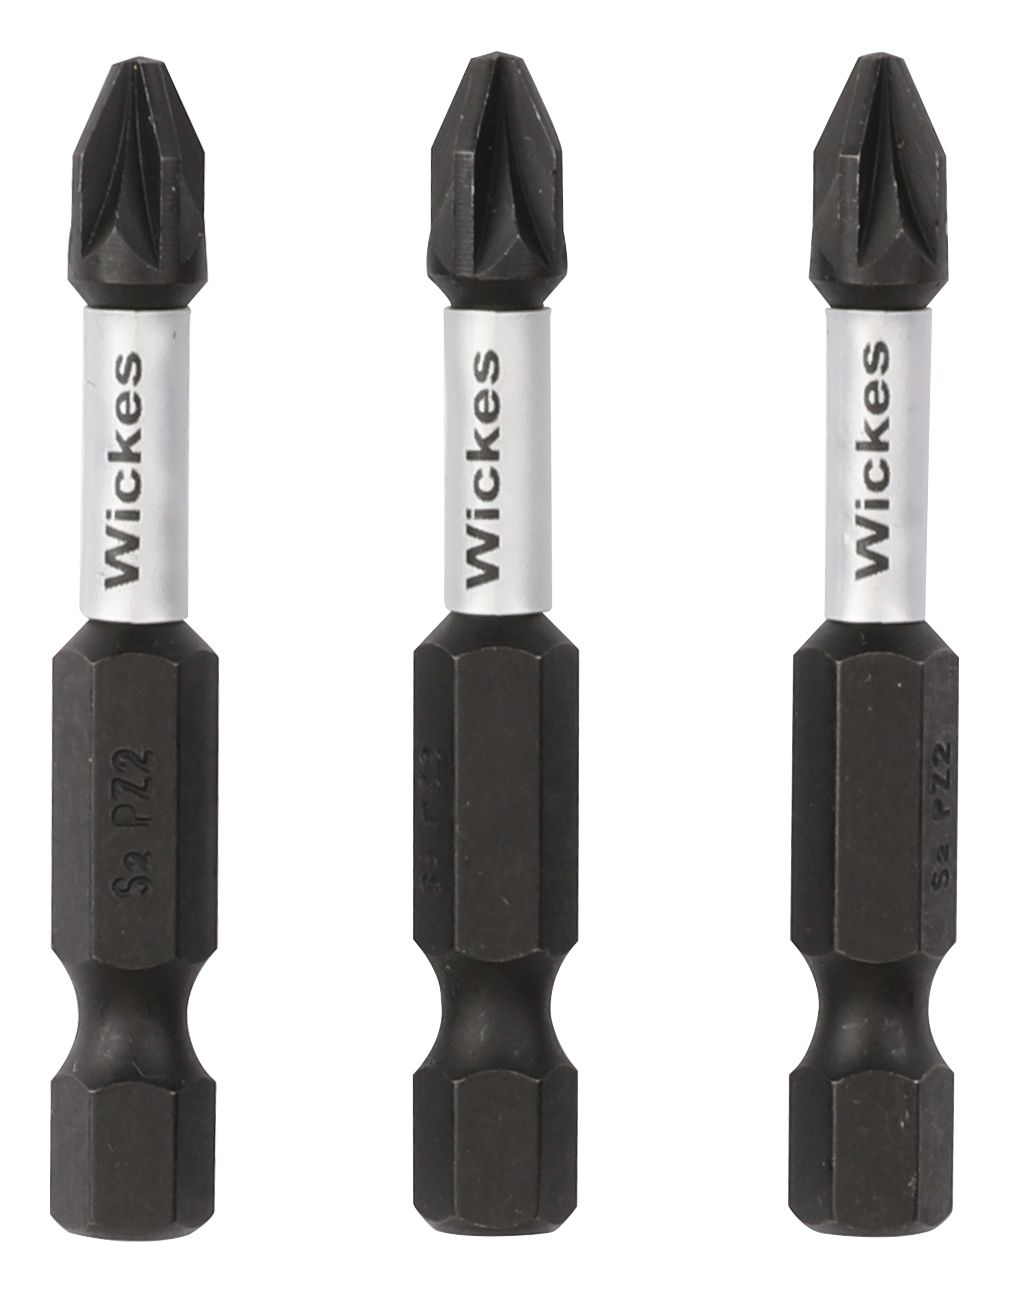 Image of Wickes Impact Screwdriver Bit PZ2 - 50mm - Pack of 3